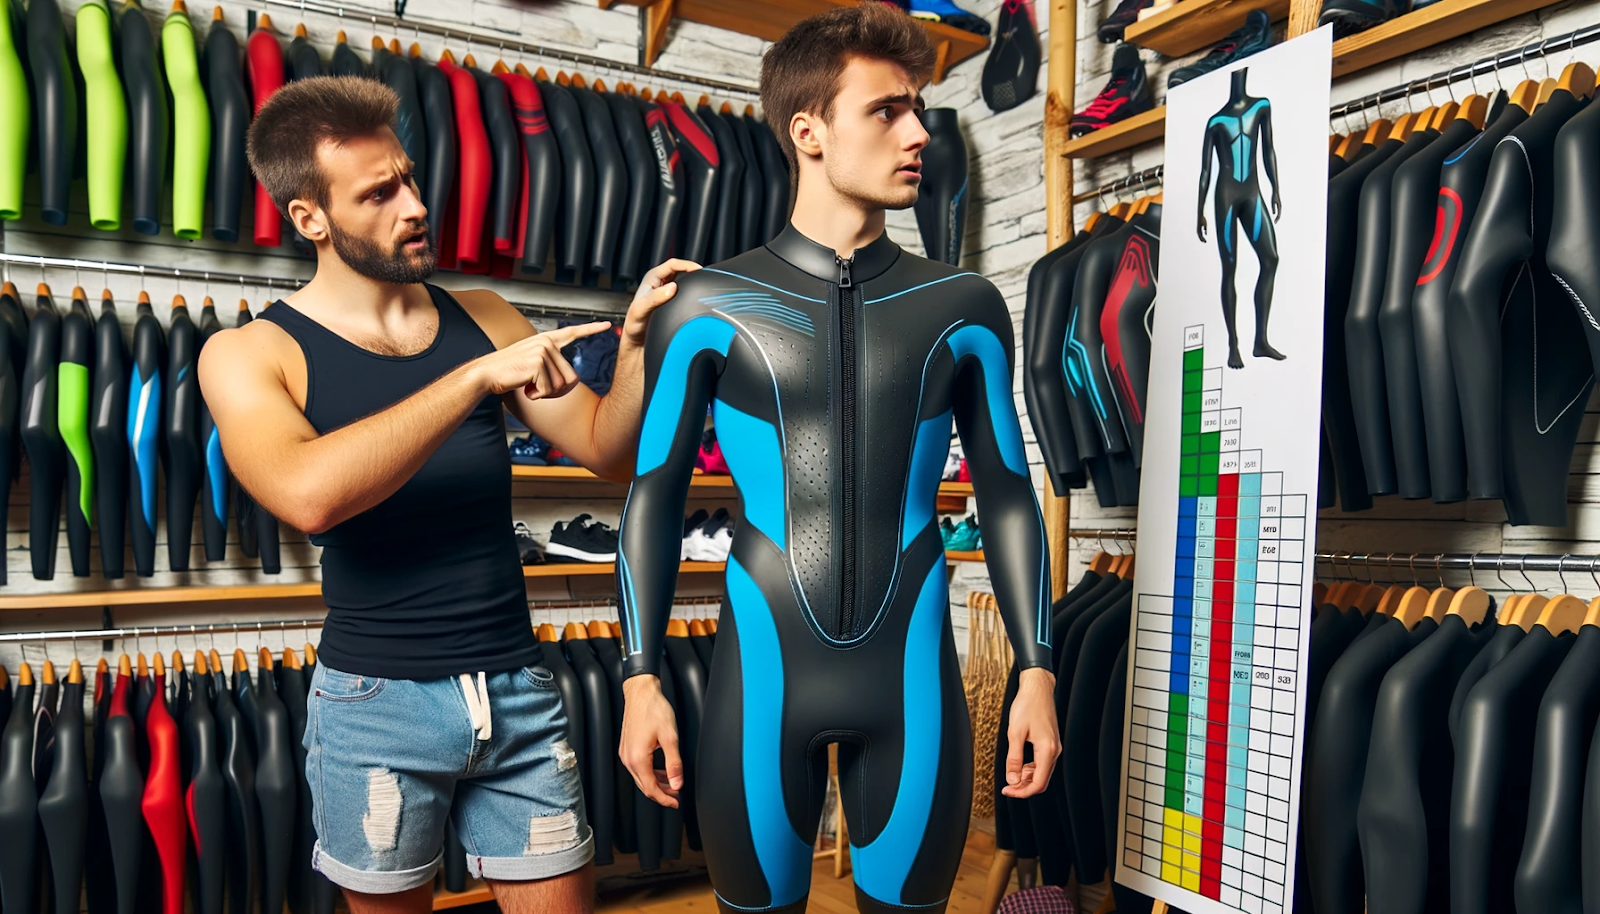 Photo of a rookie triathlete standing in a store, looking at a wetsuit size chart on the wall. They're holding a wetsuit that is clearly too small for their physique. A more experienced triathlete stands beside them, pointing at the chart with a concerned expression, suggesting that they should consider more factors than just the height/weight. Around them, there are racks filled with various wetsuits, some with bold colors and trendy designs.